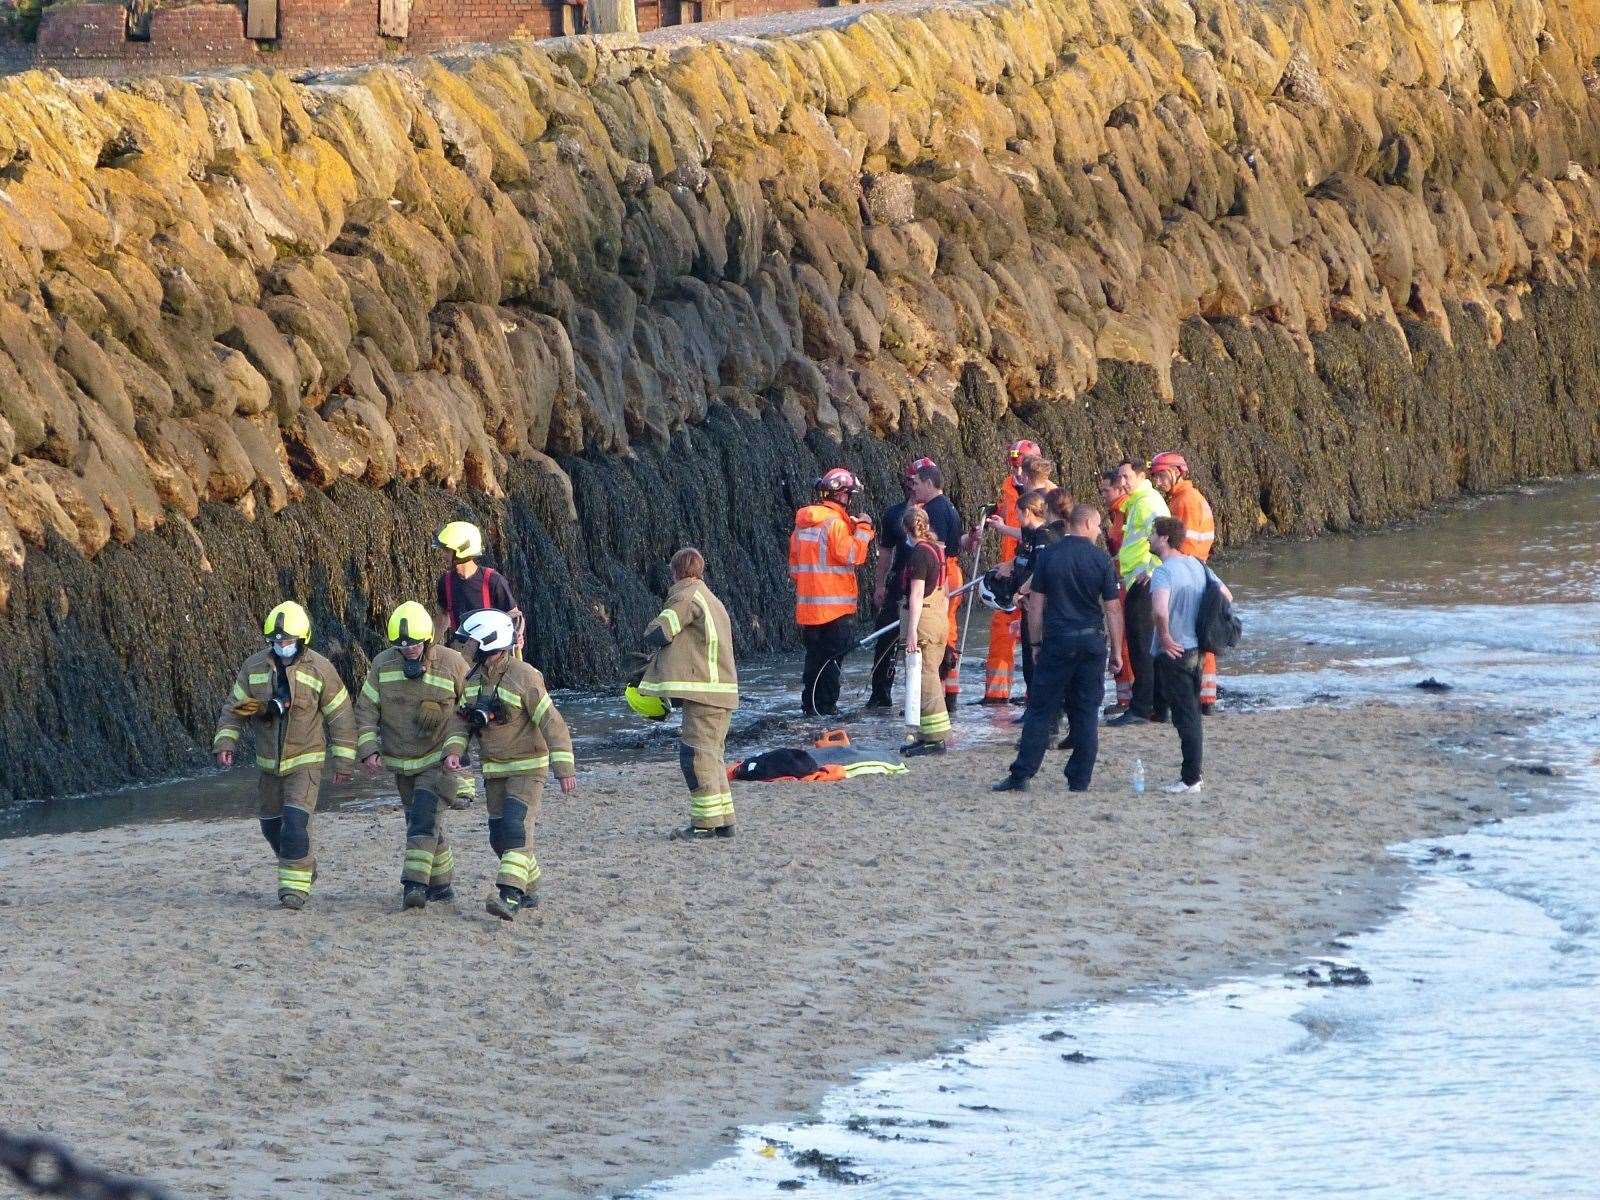 The dog's rescue had to be abandoned due to rising tides. Picture: Kent 999s/Twitter